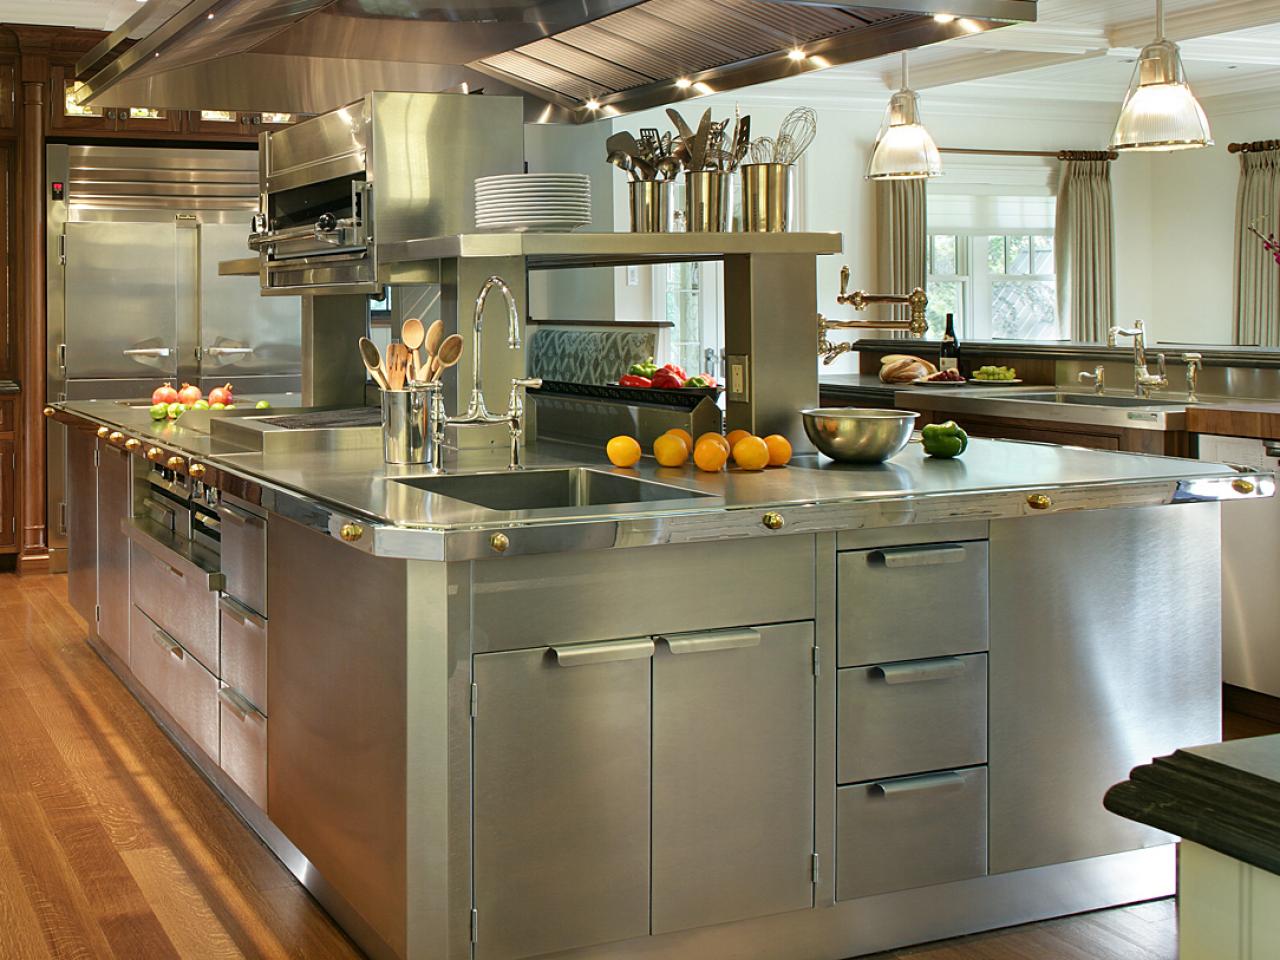 Stainless Steel Kitchen Cabinets Pictures, Options, Tips & Ideas ...